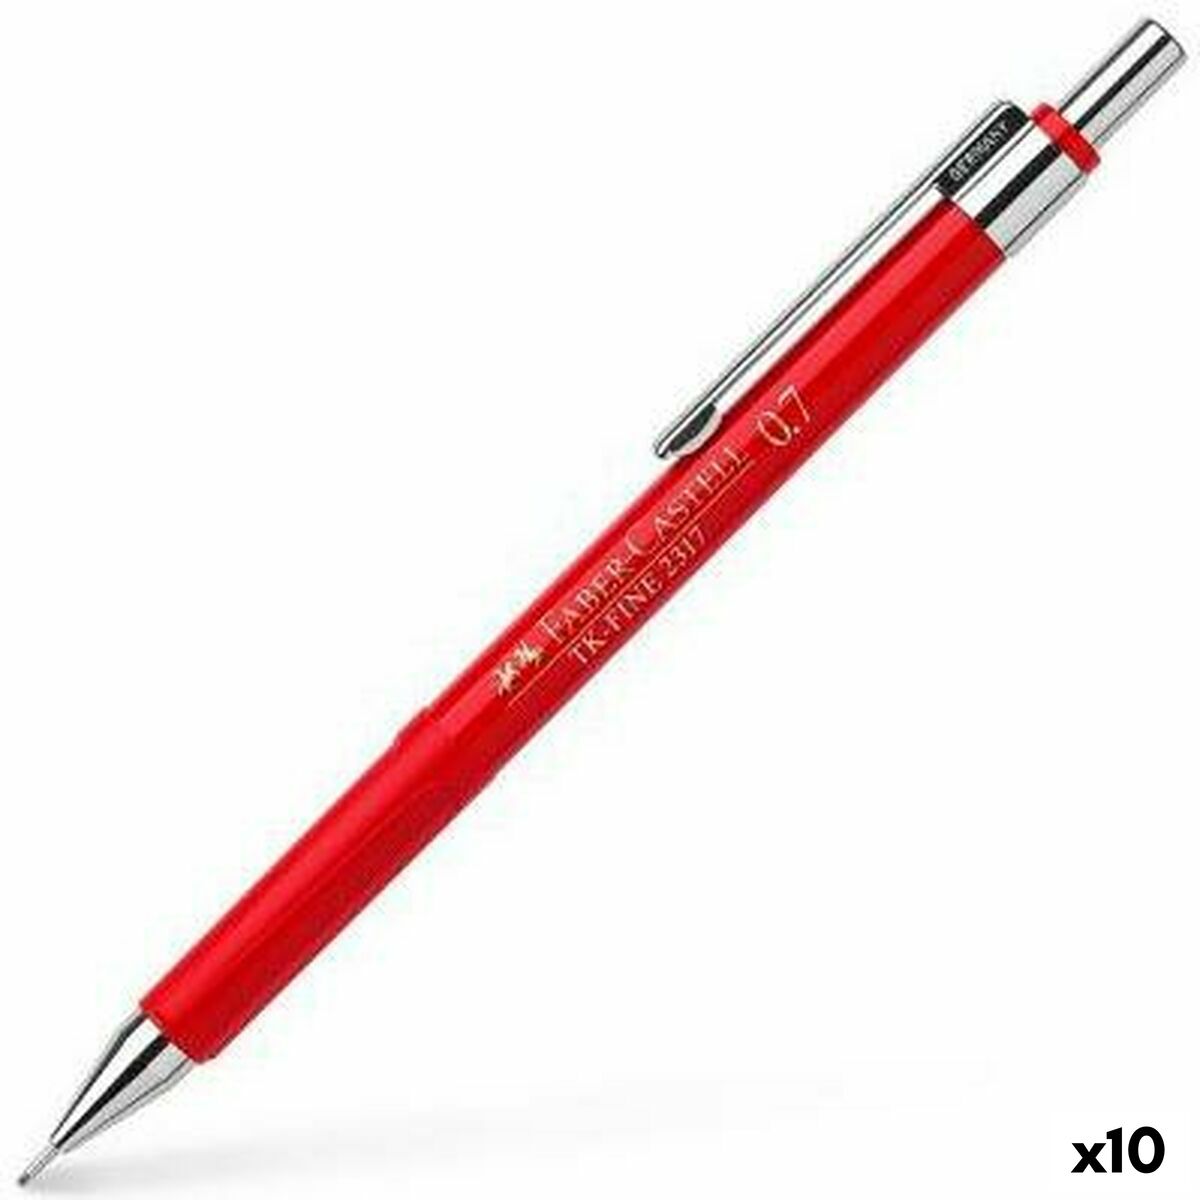 Pencil Lead Holder Faber-Castell Tk-Fine 2317 Red 0,7 mm (10Units)